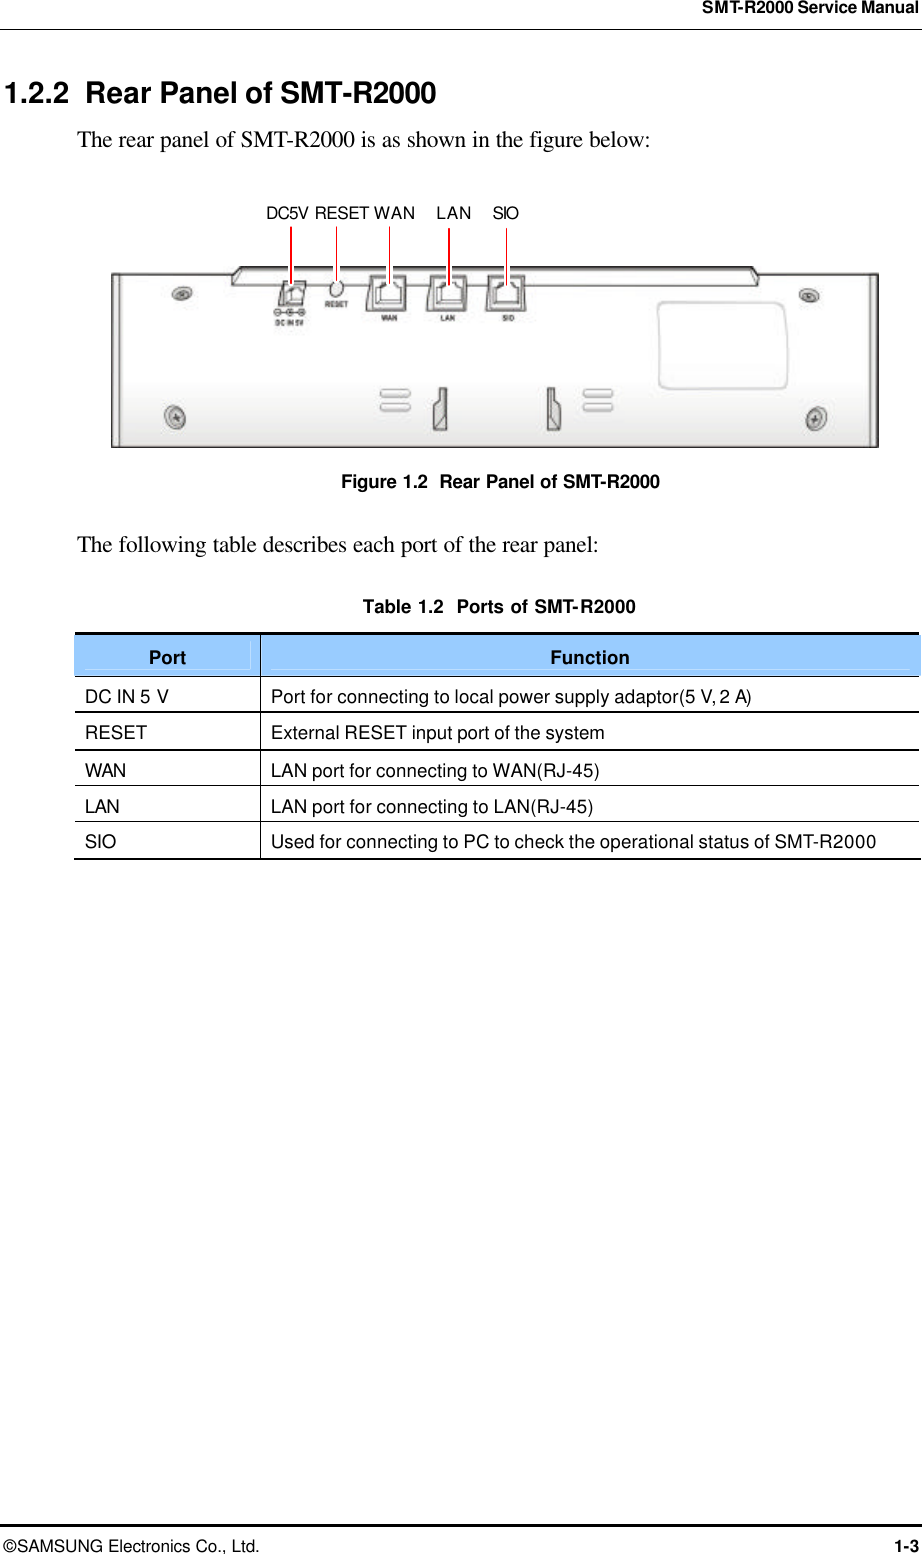  SMT-R2000 Service Manual © SAMSUNG Electronics Co., Ltd. 1-3 1.2.2 Rear Panel of SMT-R2000 The rear panel of SMT-R2000 is as shown in the figure below:  Figure 1.2  Rear Panel of SMT-R2000  The following table describes each port of the rear panel:  Table 1.2  Ports of SMT-R2000 Port Function DC IN 5 V Port for connecting to local power supply adaptor(5 V, 2 A) RESET External RESET input port of the system  WAN LAN port for connecting to WAN(RJ-45) LAN LAN port for connecting to LAN(RJ-45) SIO Used for connecting to PC to check the operational status of SMT-R2000      LAN SIO DC5V RESET WAN 